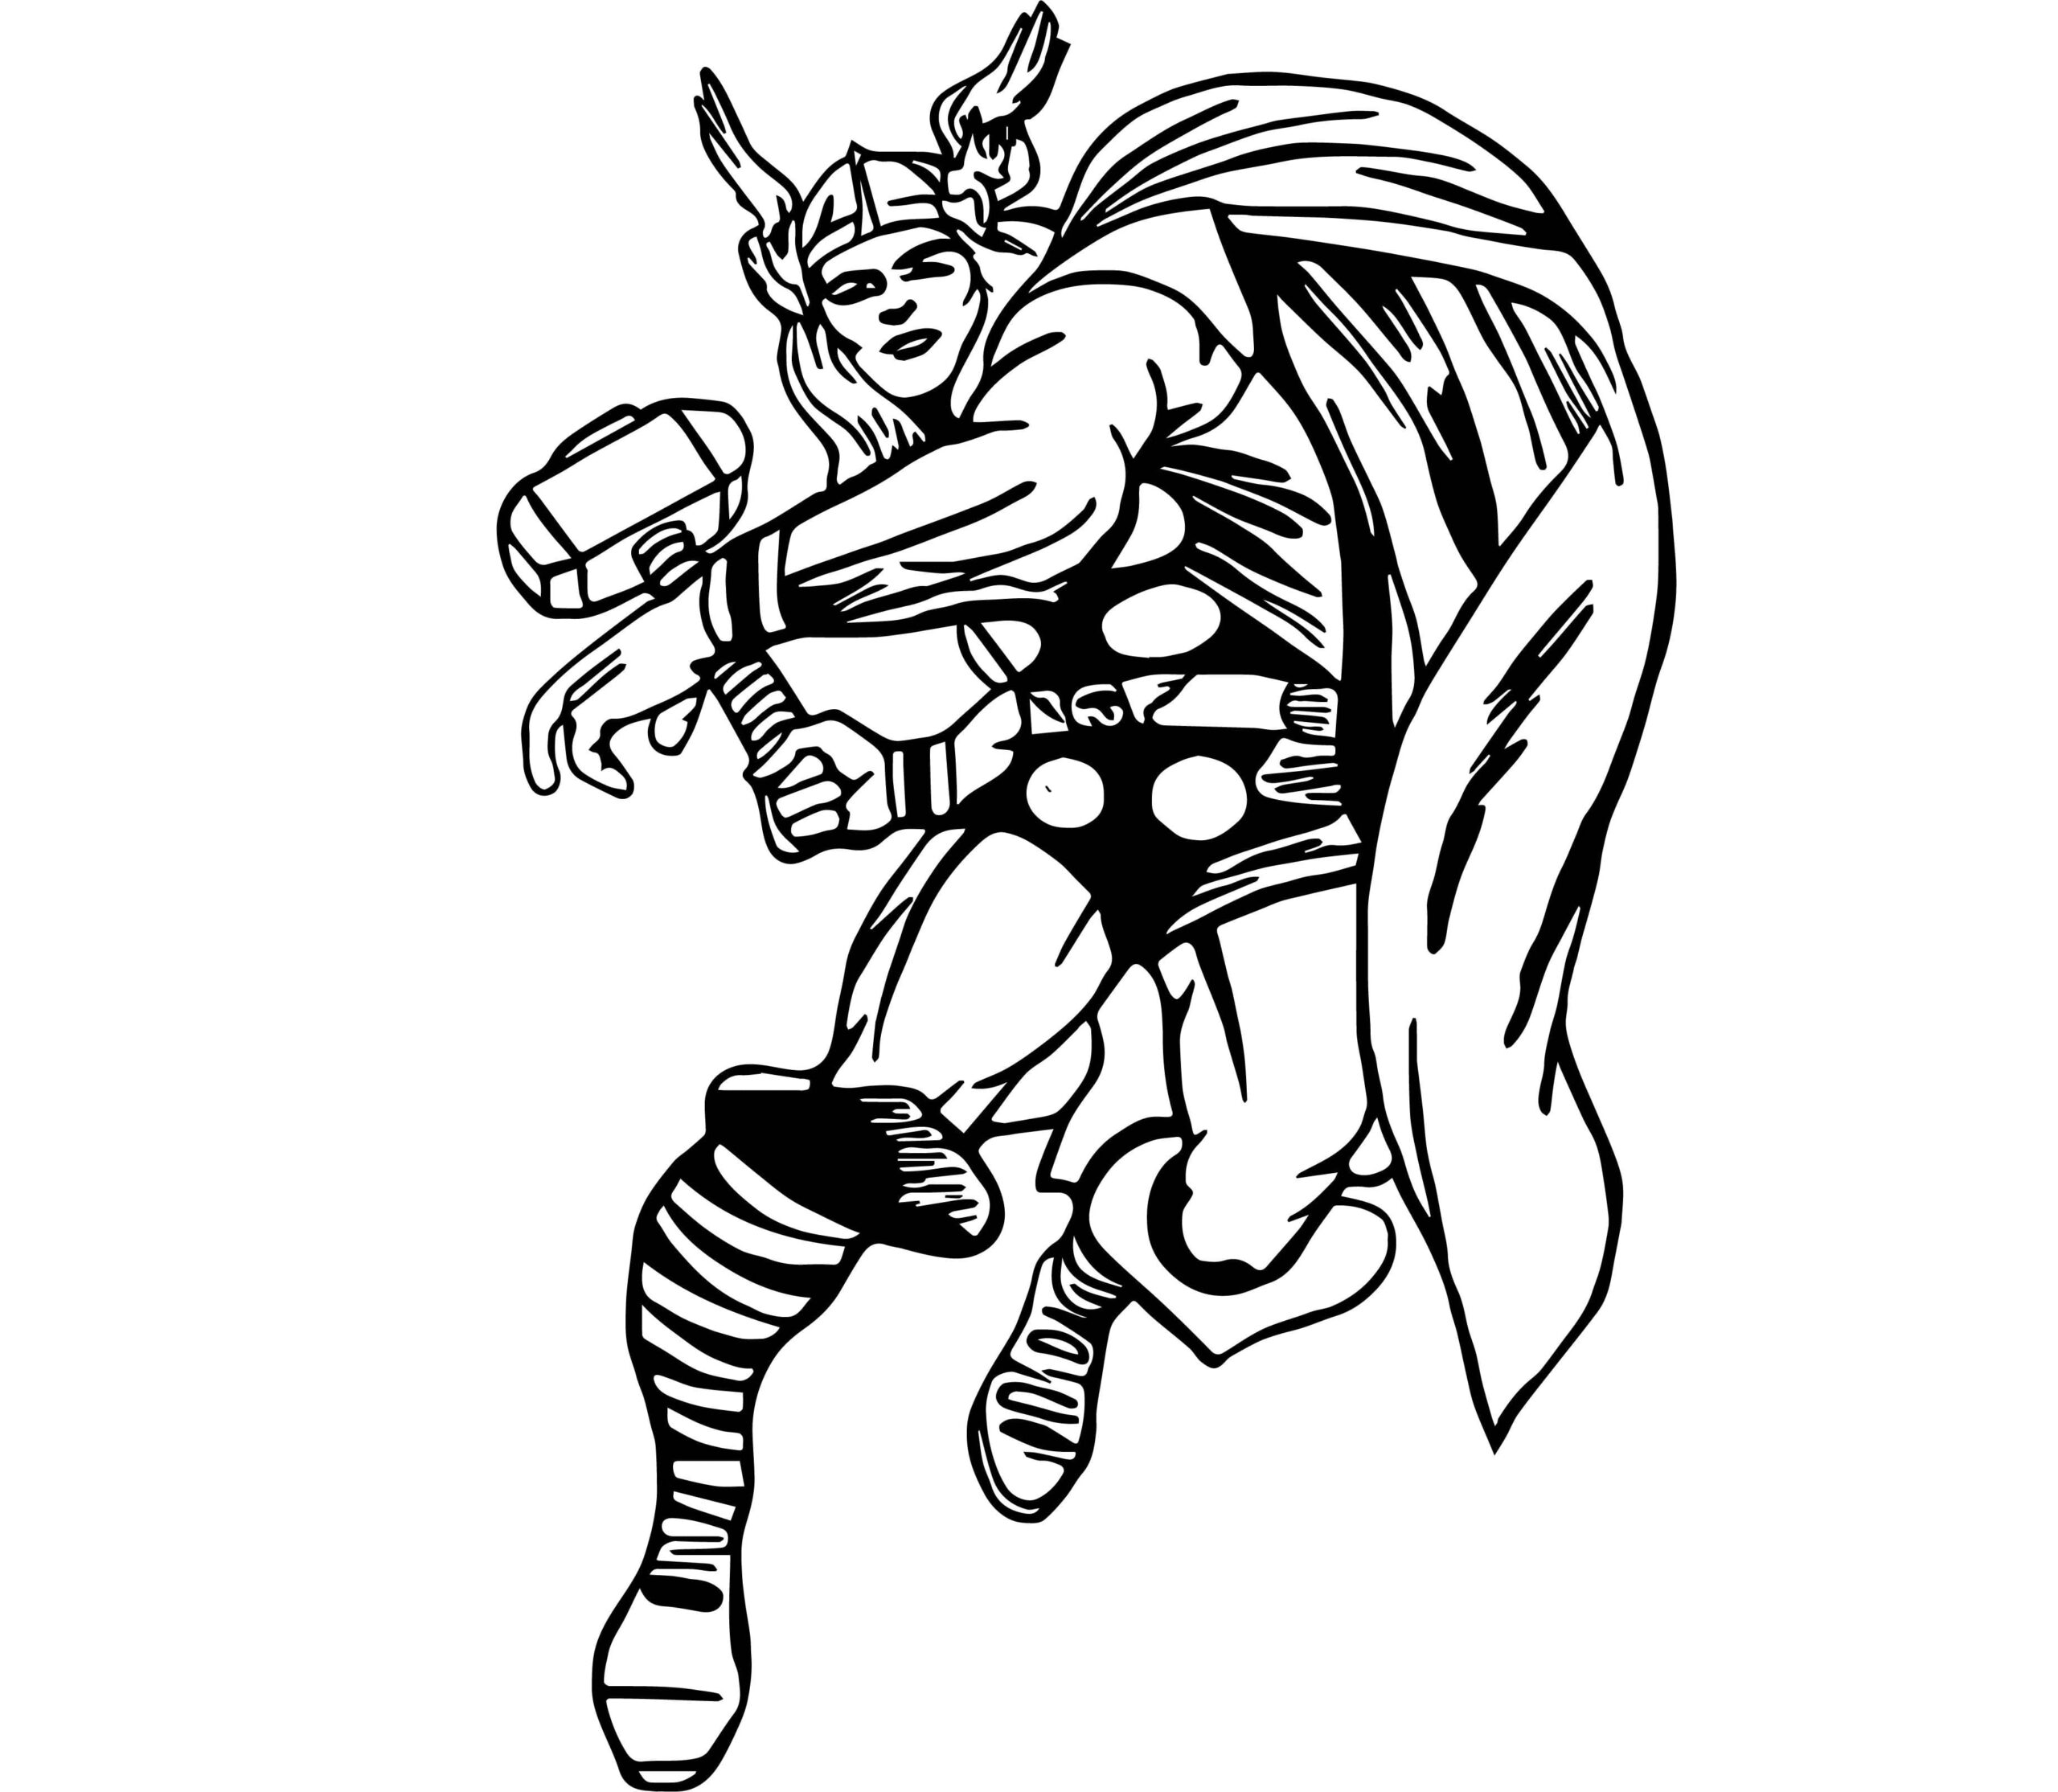 Thor Fort coloring page